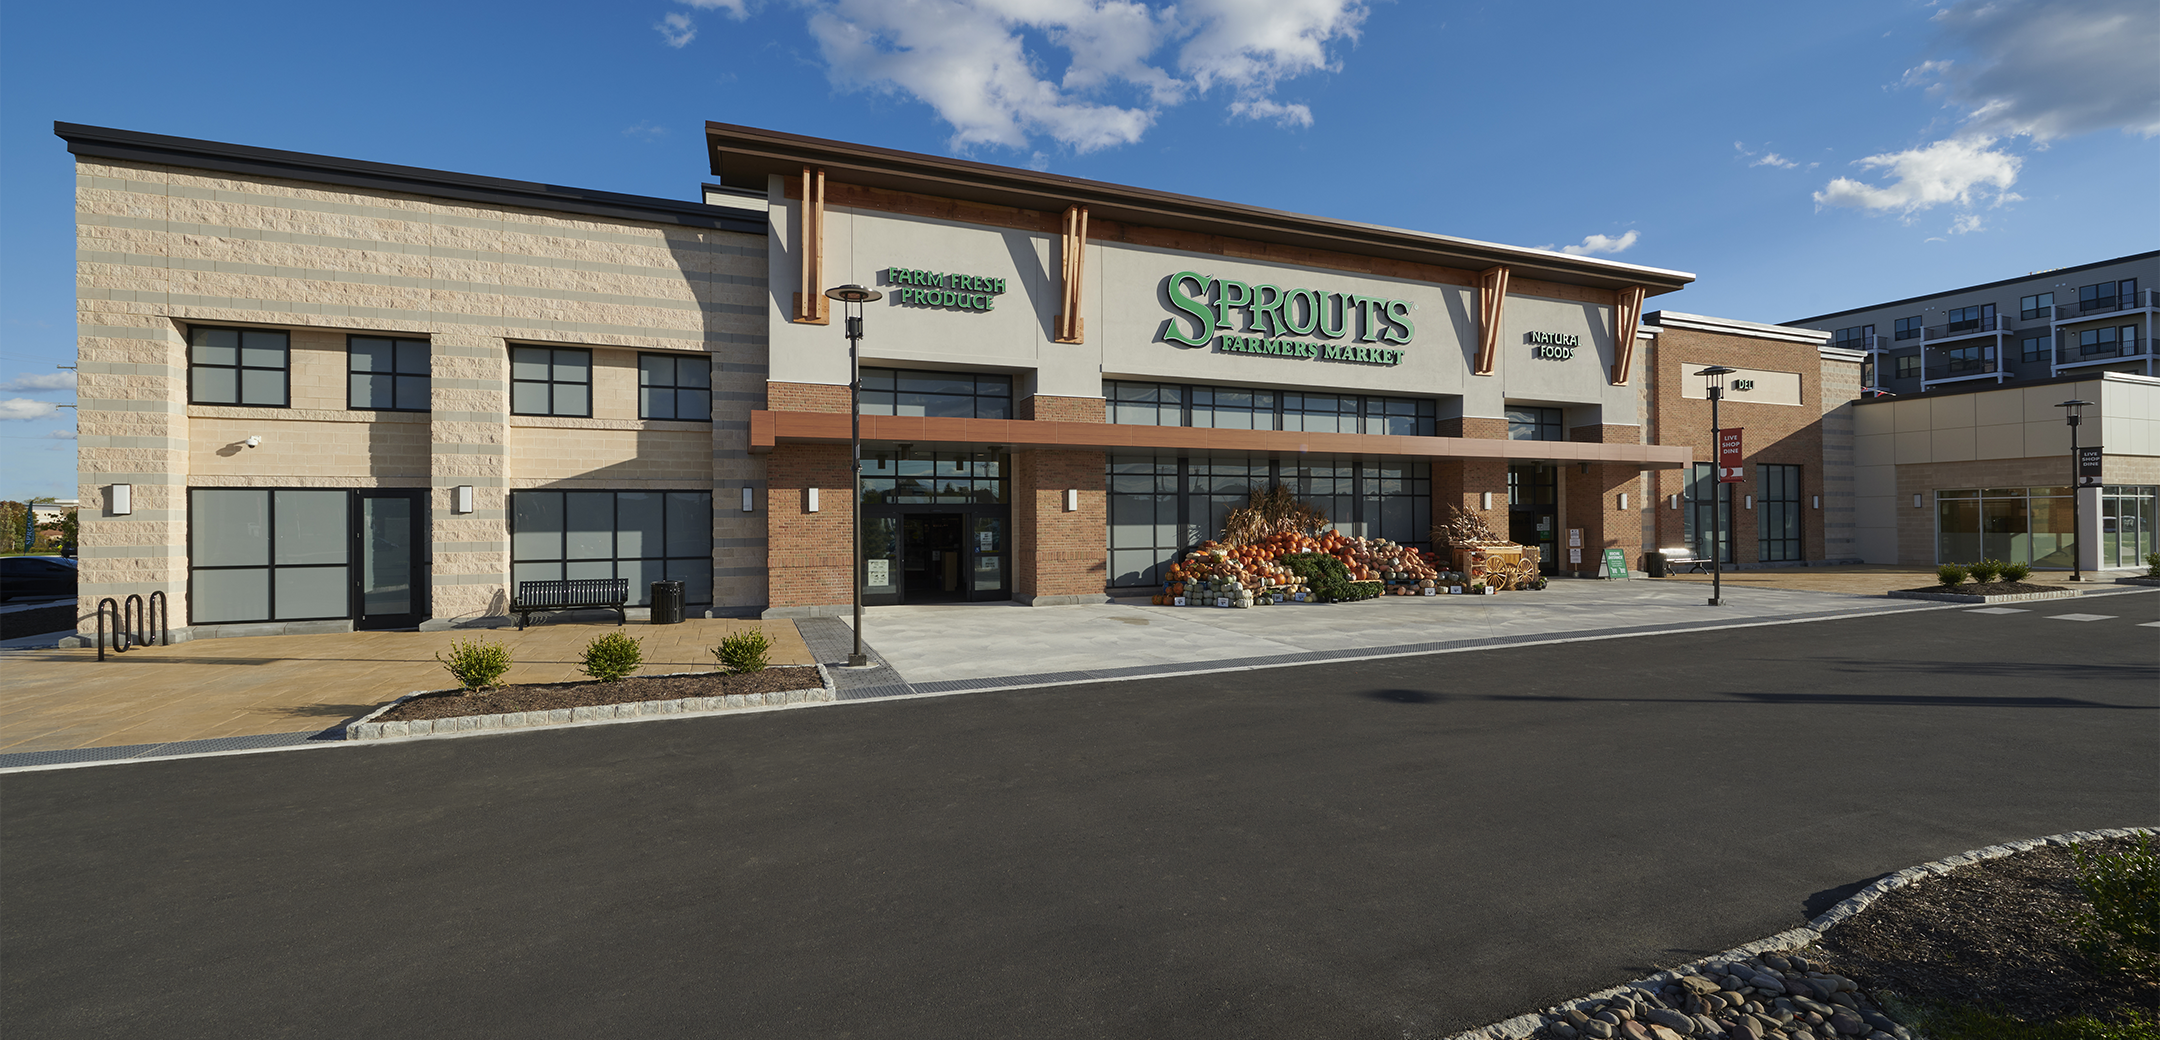 The exterior of the Sprouts Farmers Market brick building showcasing the front entrance, driveway, storefront flowers and a road in the foreground.